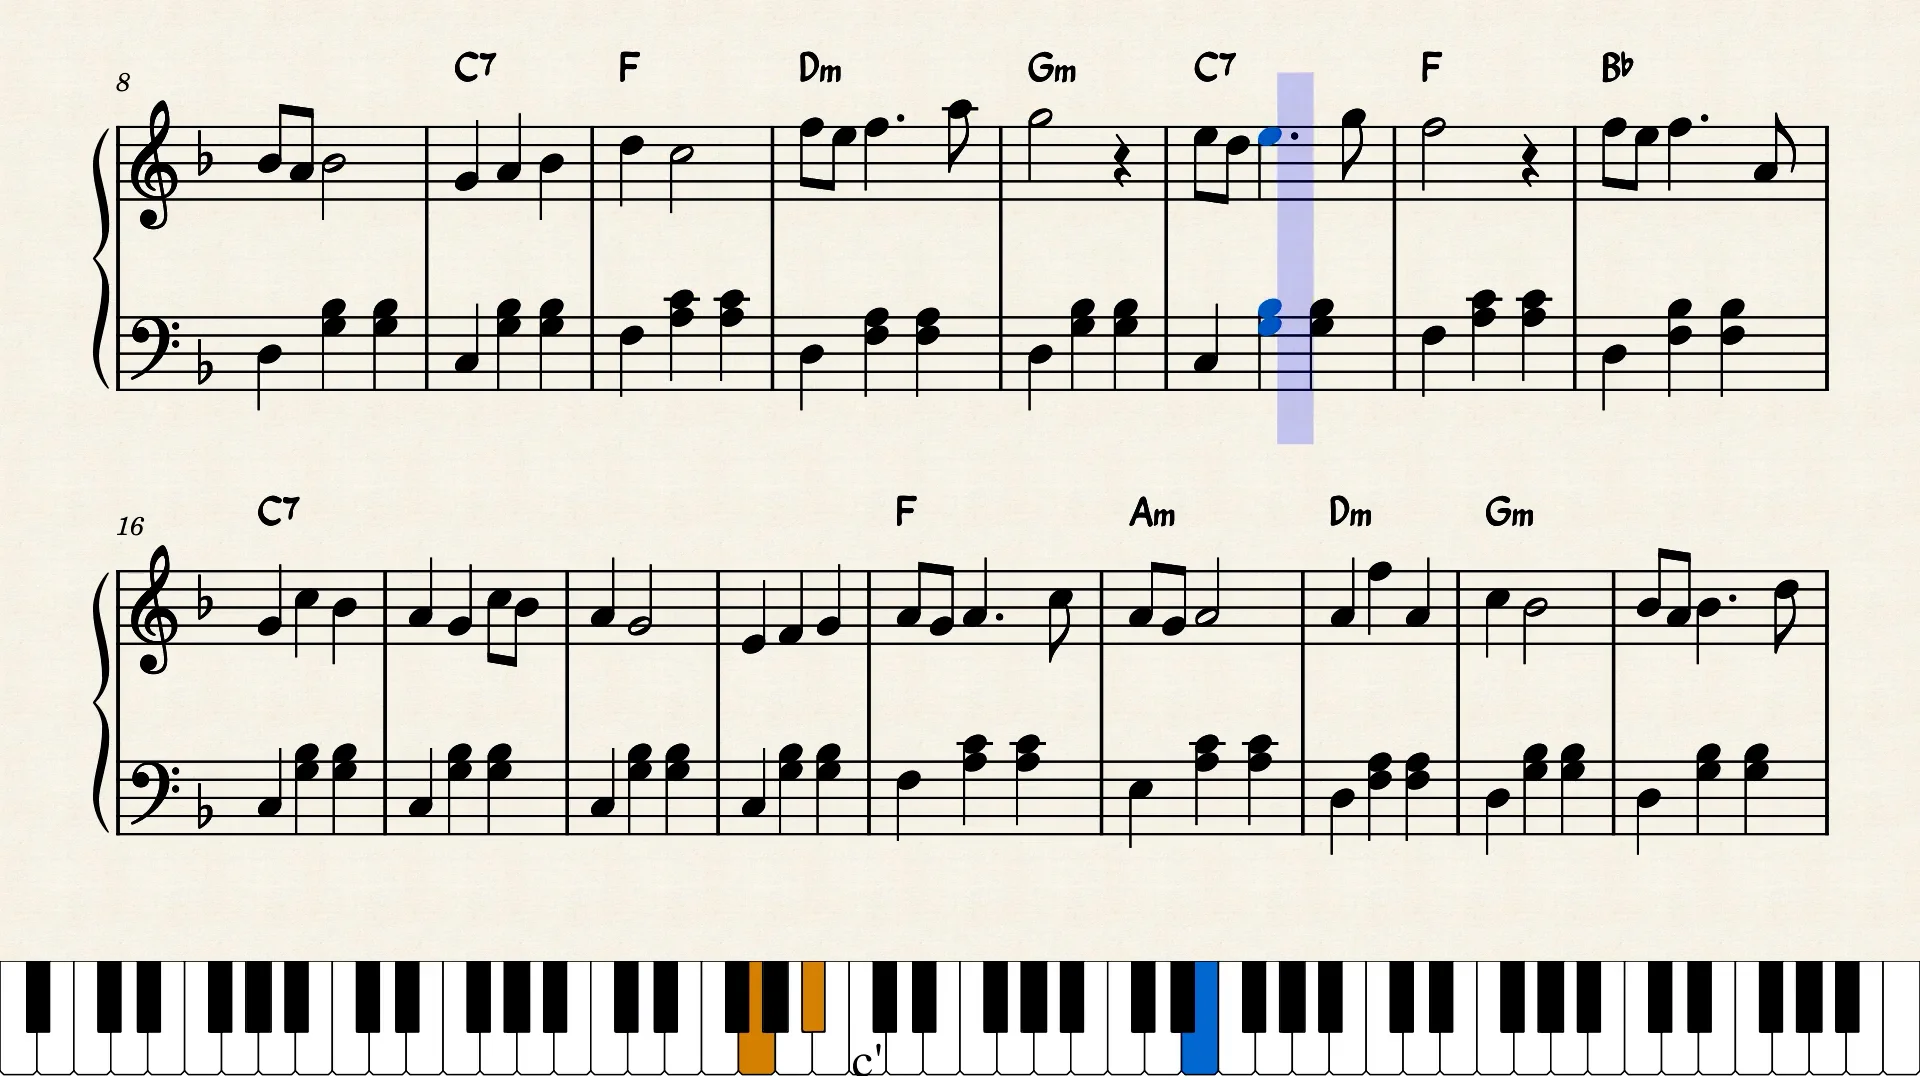 Cerf Volant - by Bruno Coulais from the movie Les Choristes Piano Solo with  sheet music (partition).mp4 on Vimeo